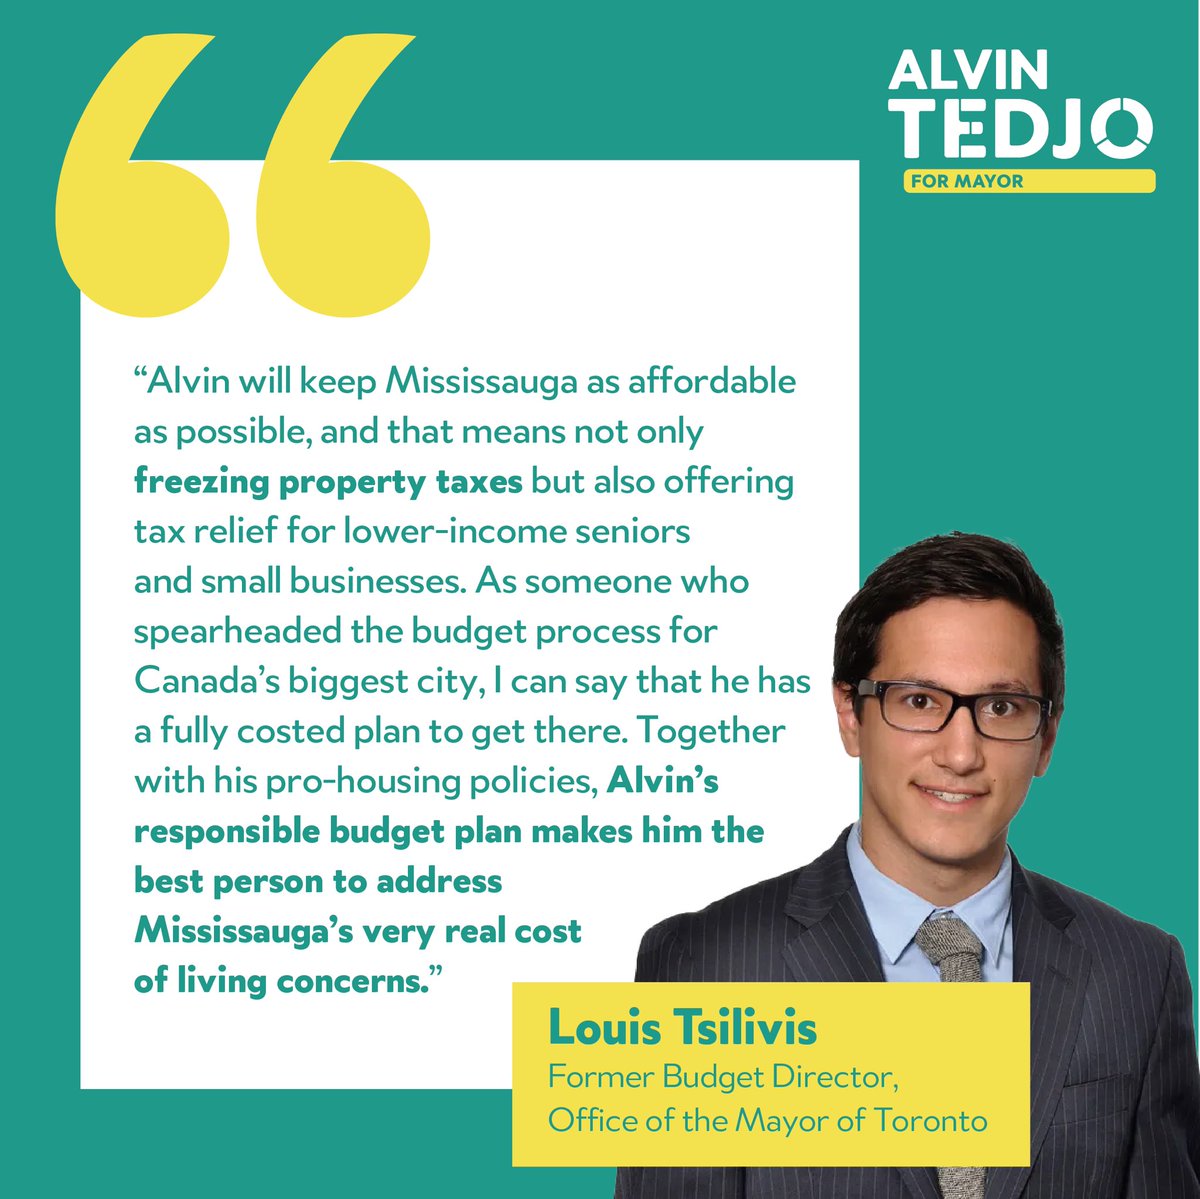 Some say it’s impossible to freeze property taxes in #Mississauga 🤔 We have run the numbers and this plan freezes property taxes, builds our city and delivers better service🏗️ Louis Tsilivis has drafted budgets for #Toronto and agrees that we can get it done👏👏👏